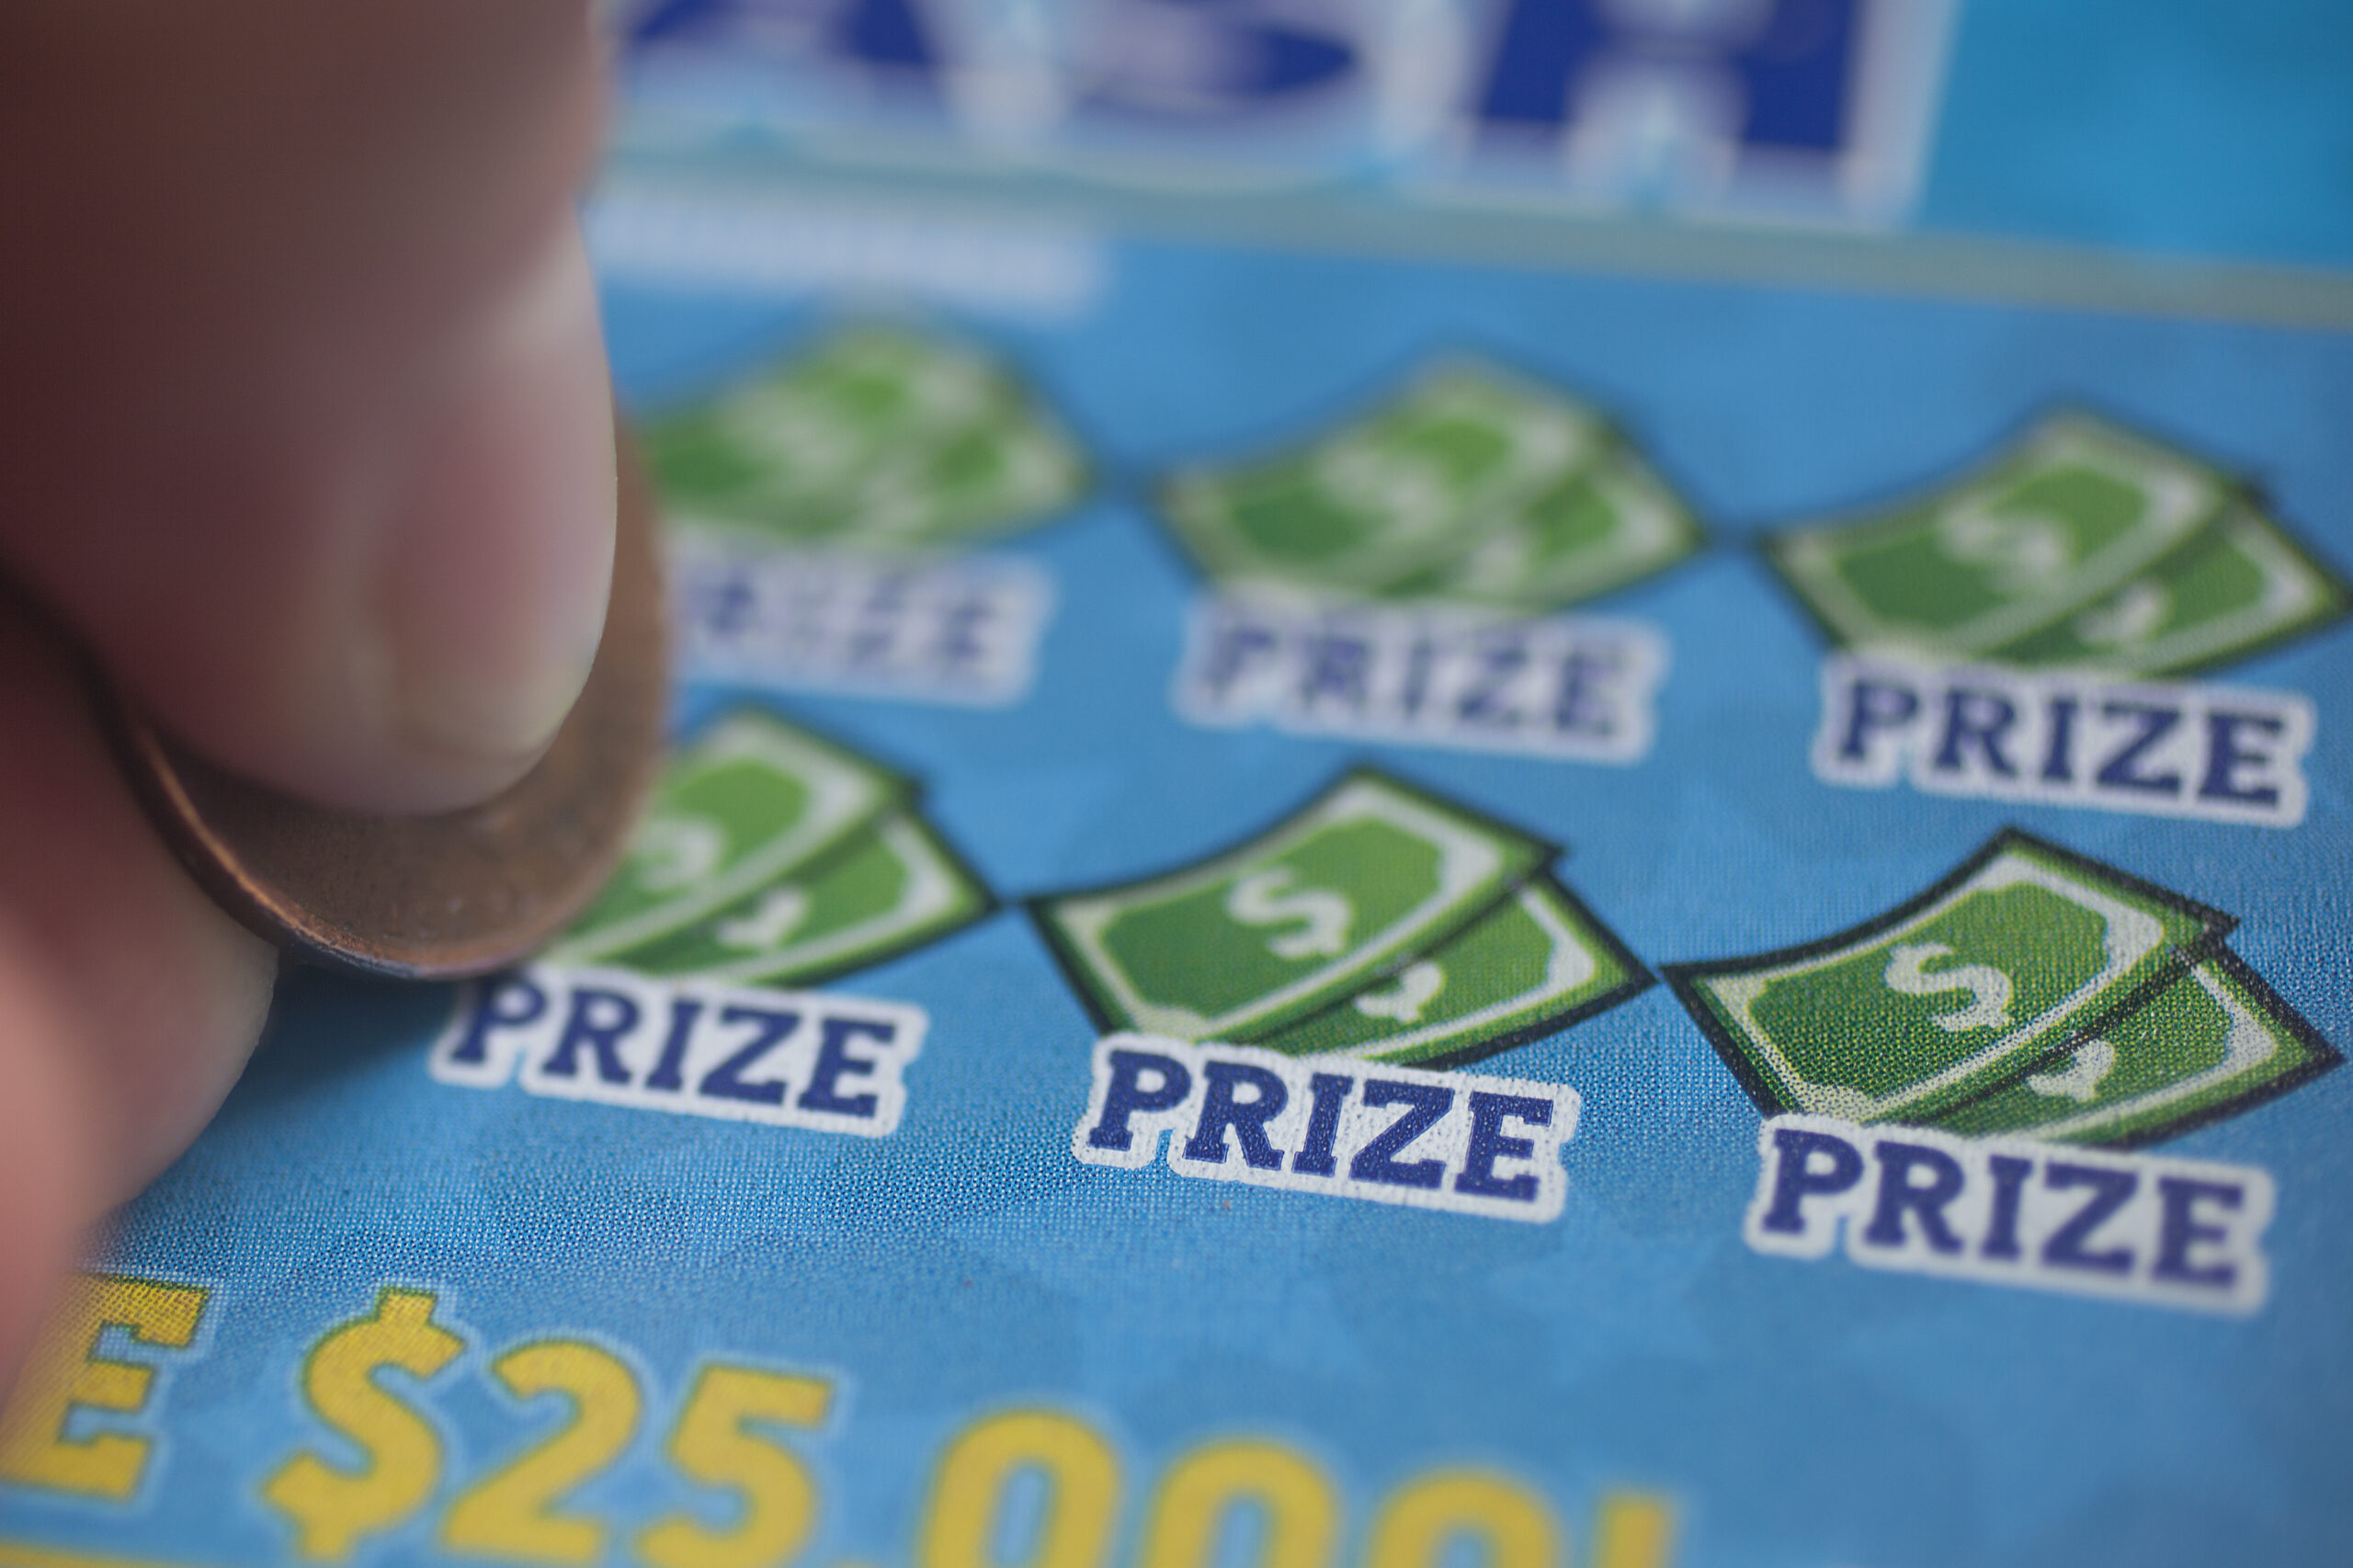 North Carolina Is One Of The Luckiest States For The Lottery